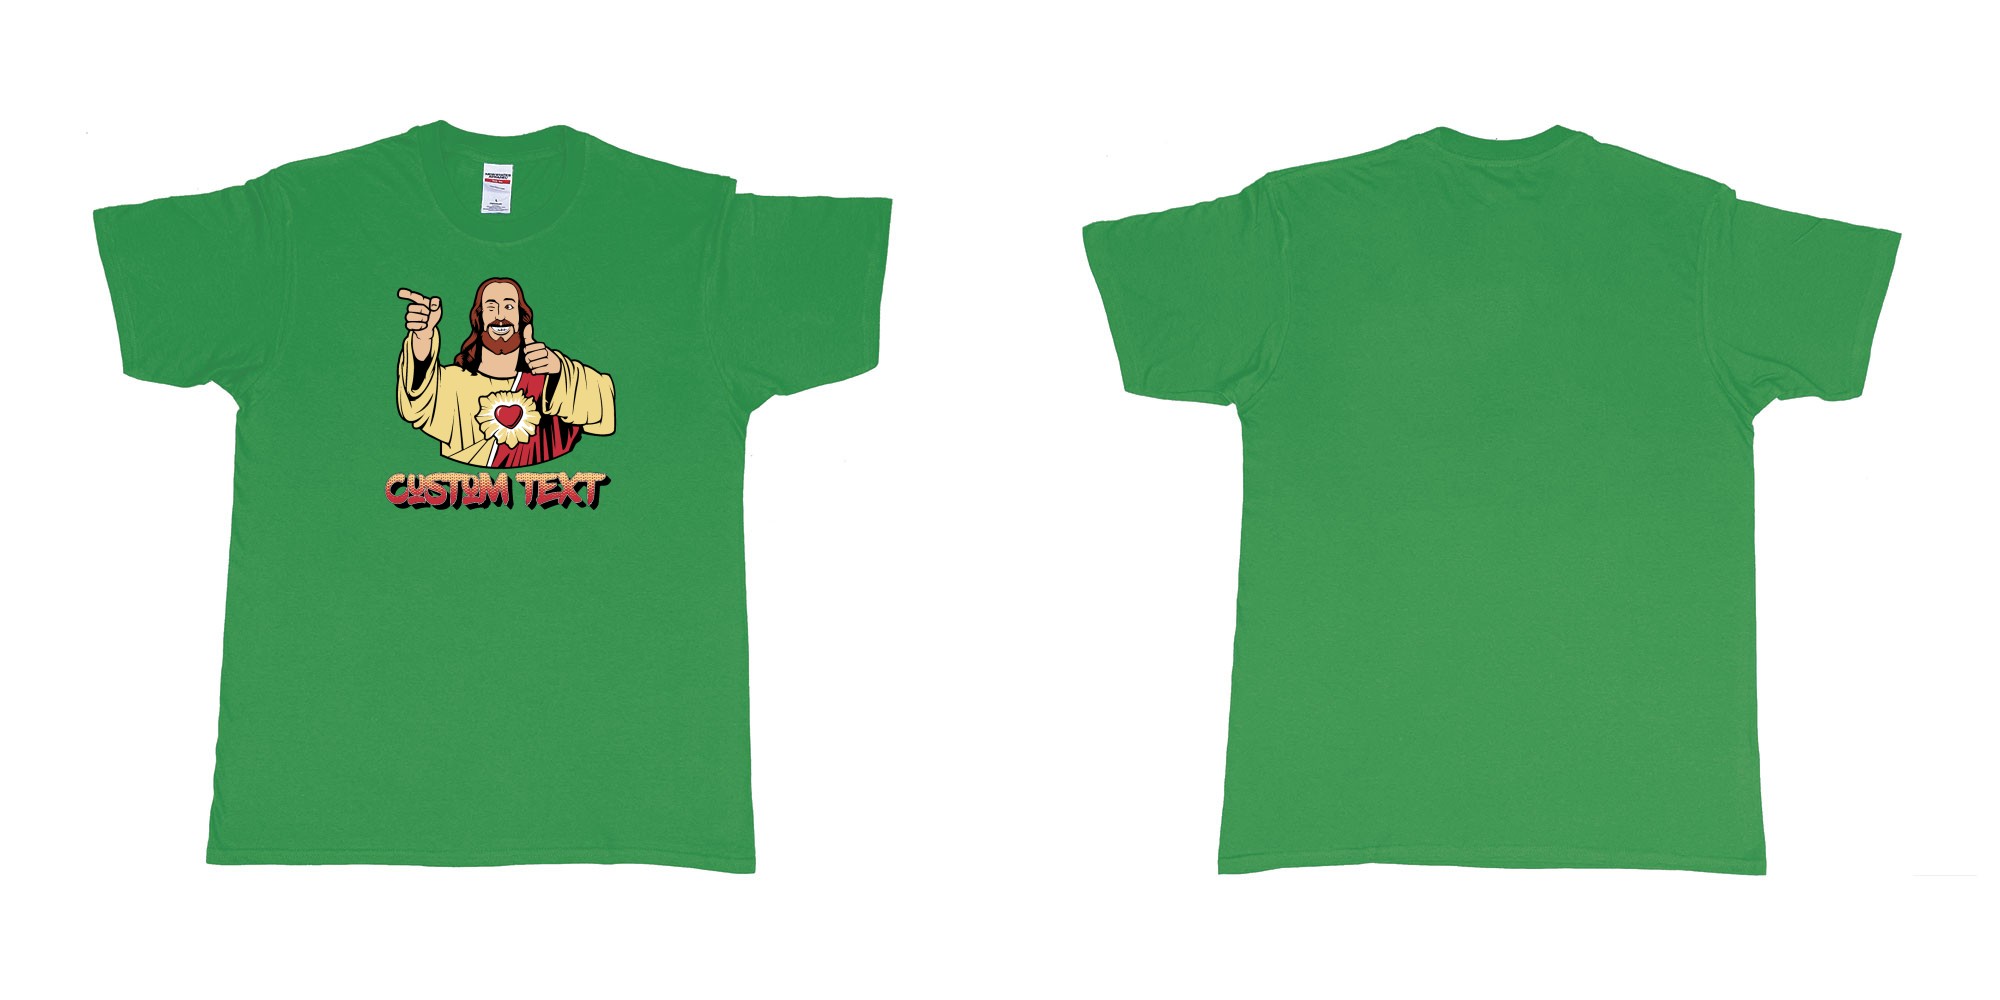 Custom tshirt design buddy christ custom text in fabric color irish-green choice your own text made in Bali by The Pirate Way